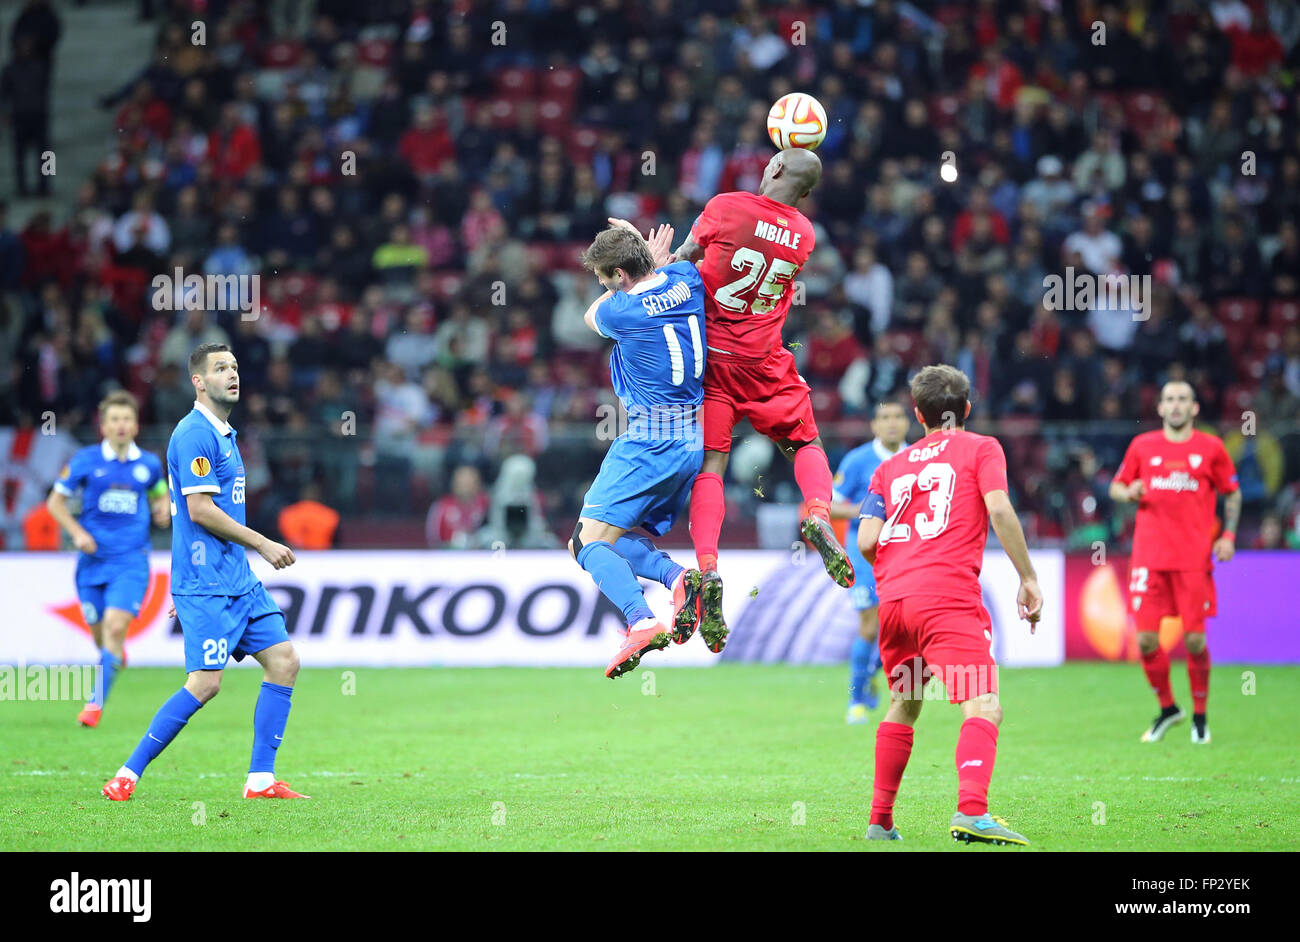 WARSAW, POLAND - MAY 27, 2015: Yevhen Seleznyov of FC Dnipro (L) fights for a ball with Stephane Mbia of FC Sevilla during their UEFA Europa League Final game at Warsaw National Stadium Stock Photo